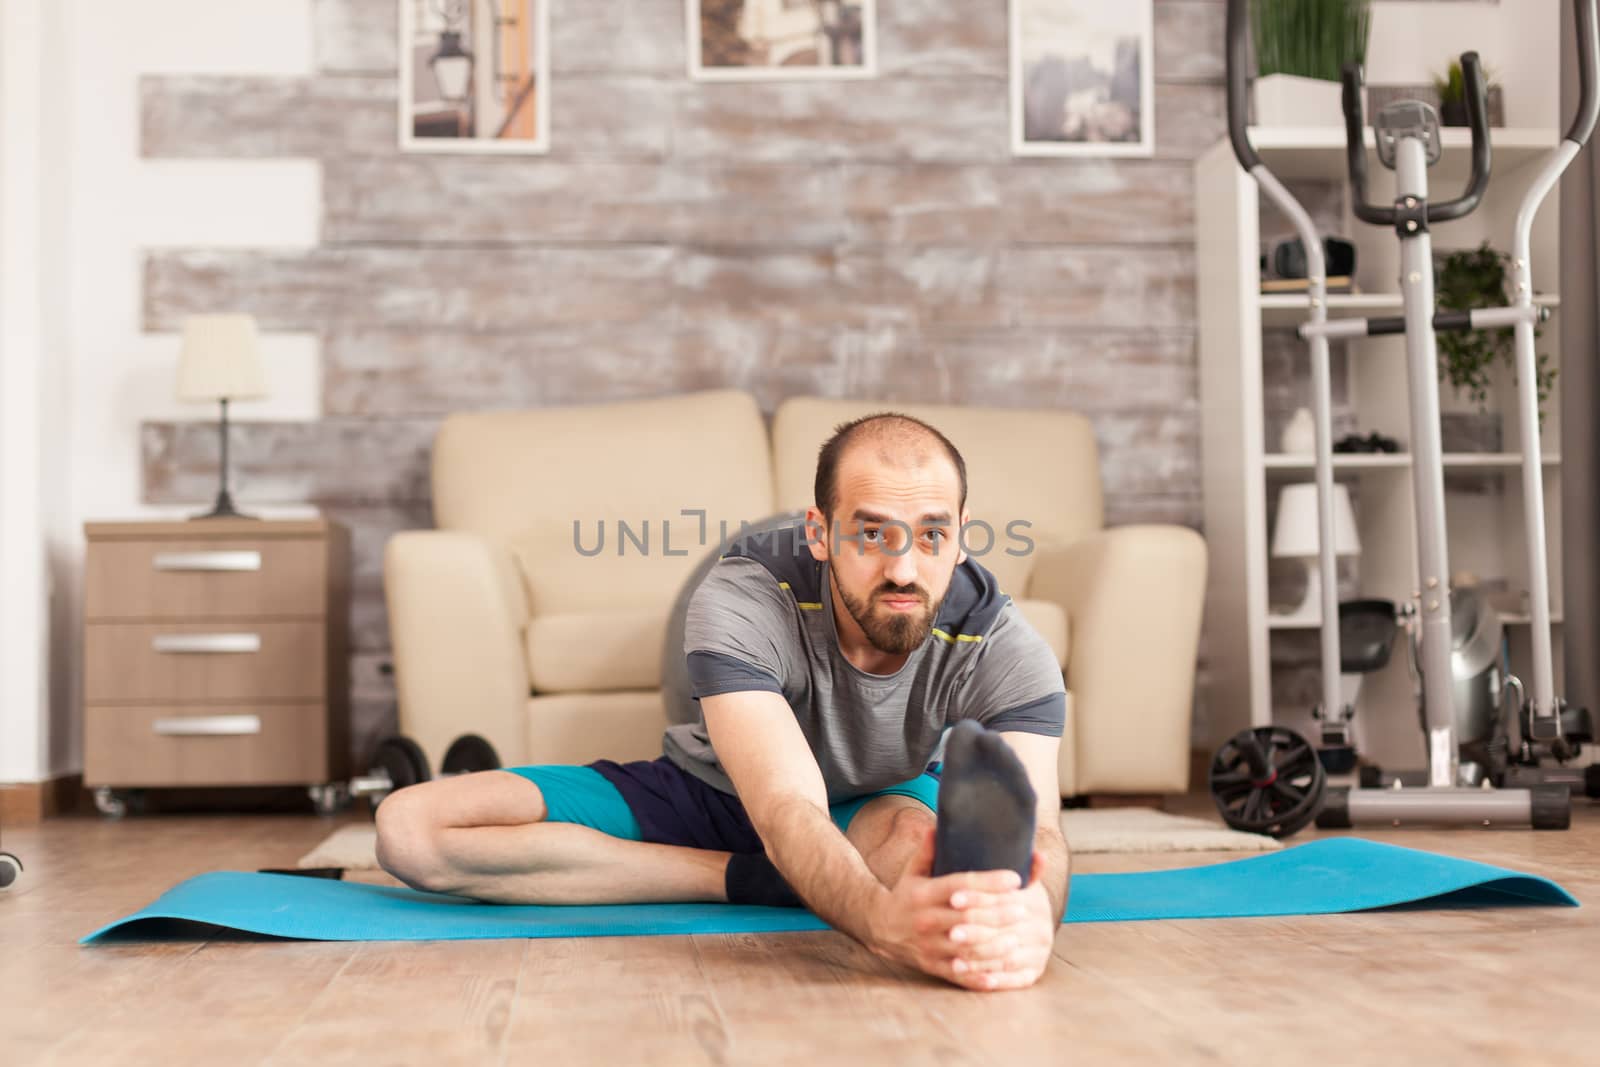 Healthy man doing mobily exercise on yoga mat at home during global pandemic.